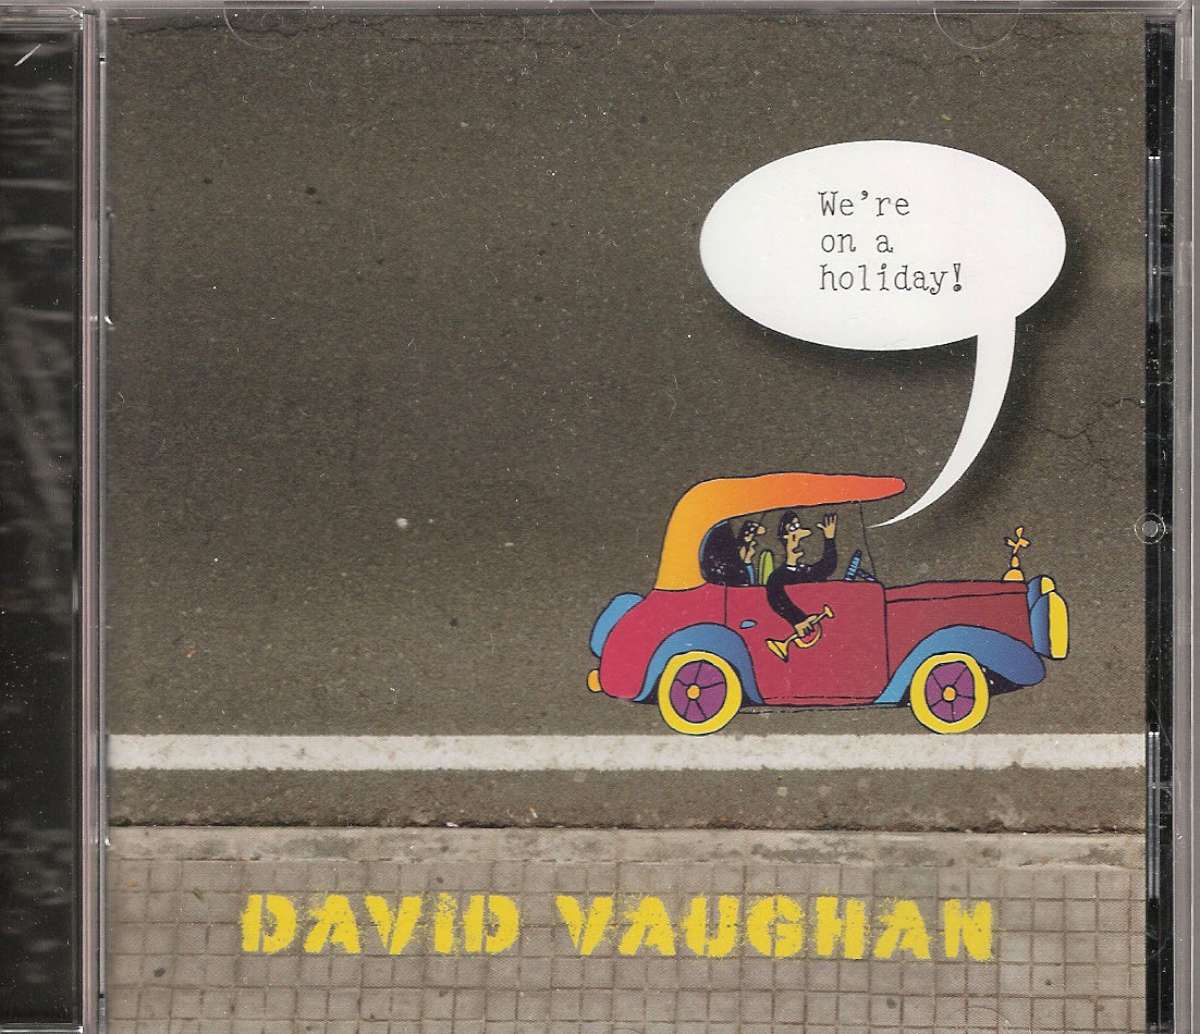 We’re on a holiday – David Vaughan (2015)